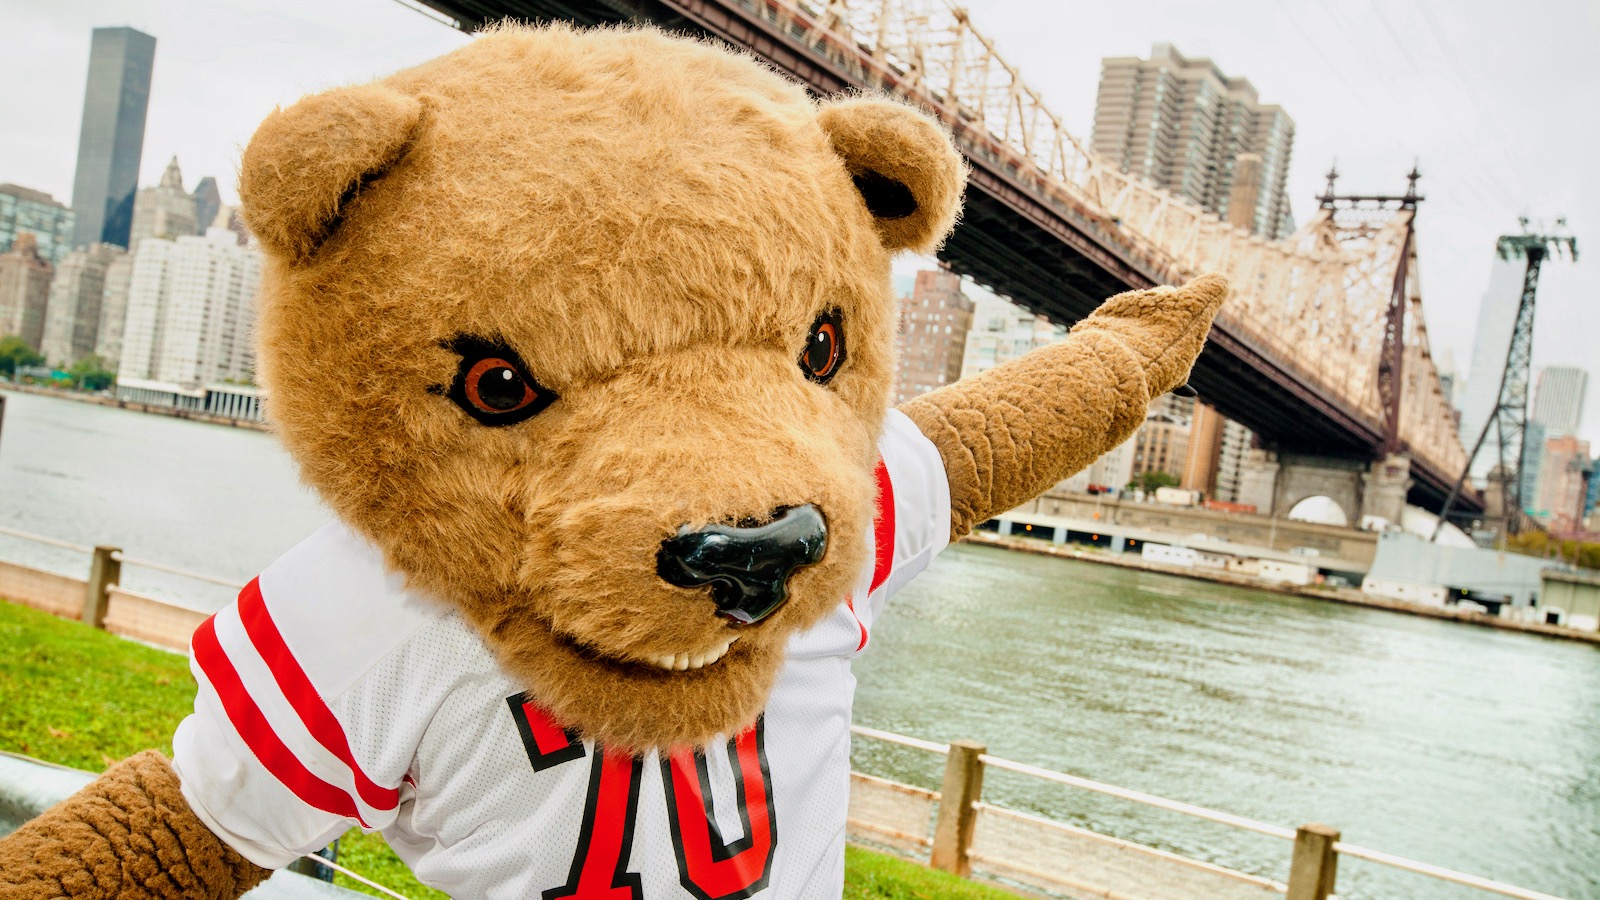 Touchdown the Bear in New York City